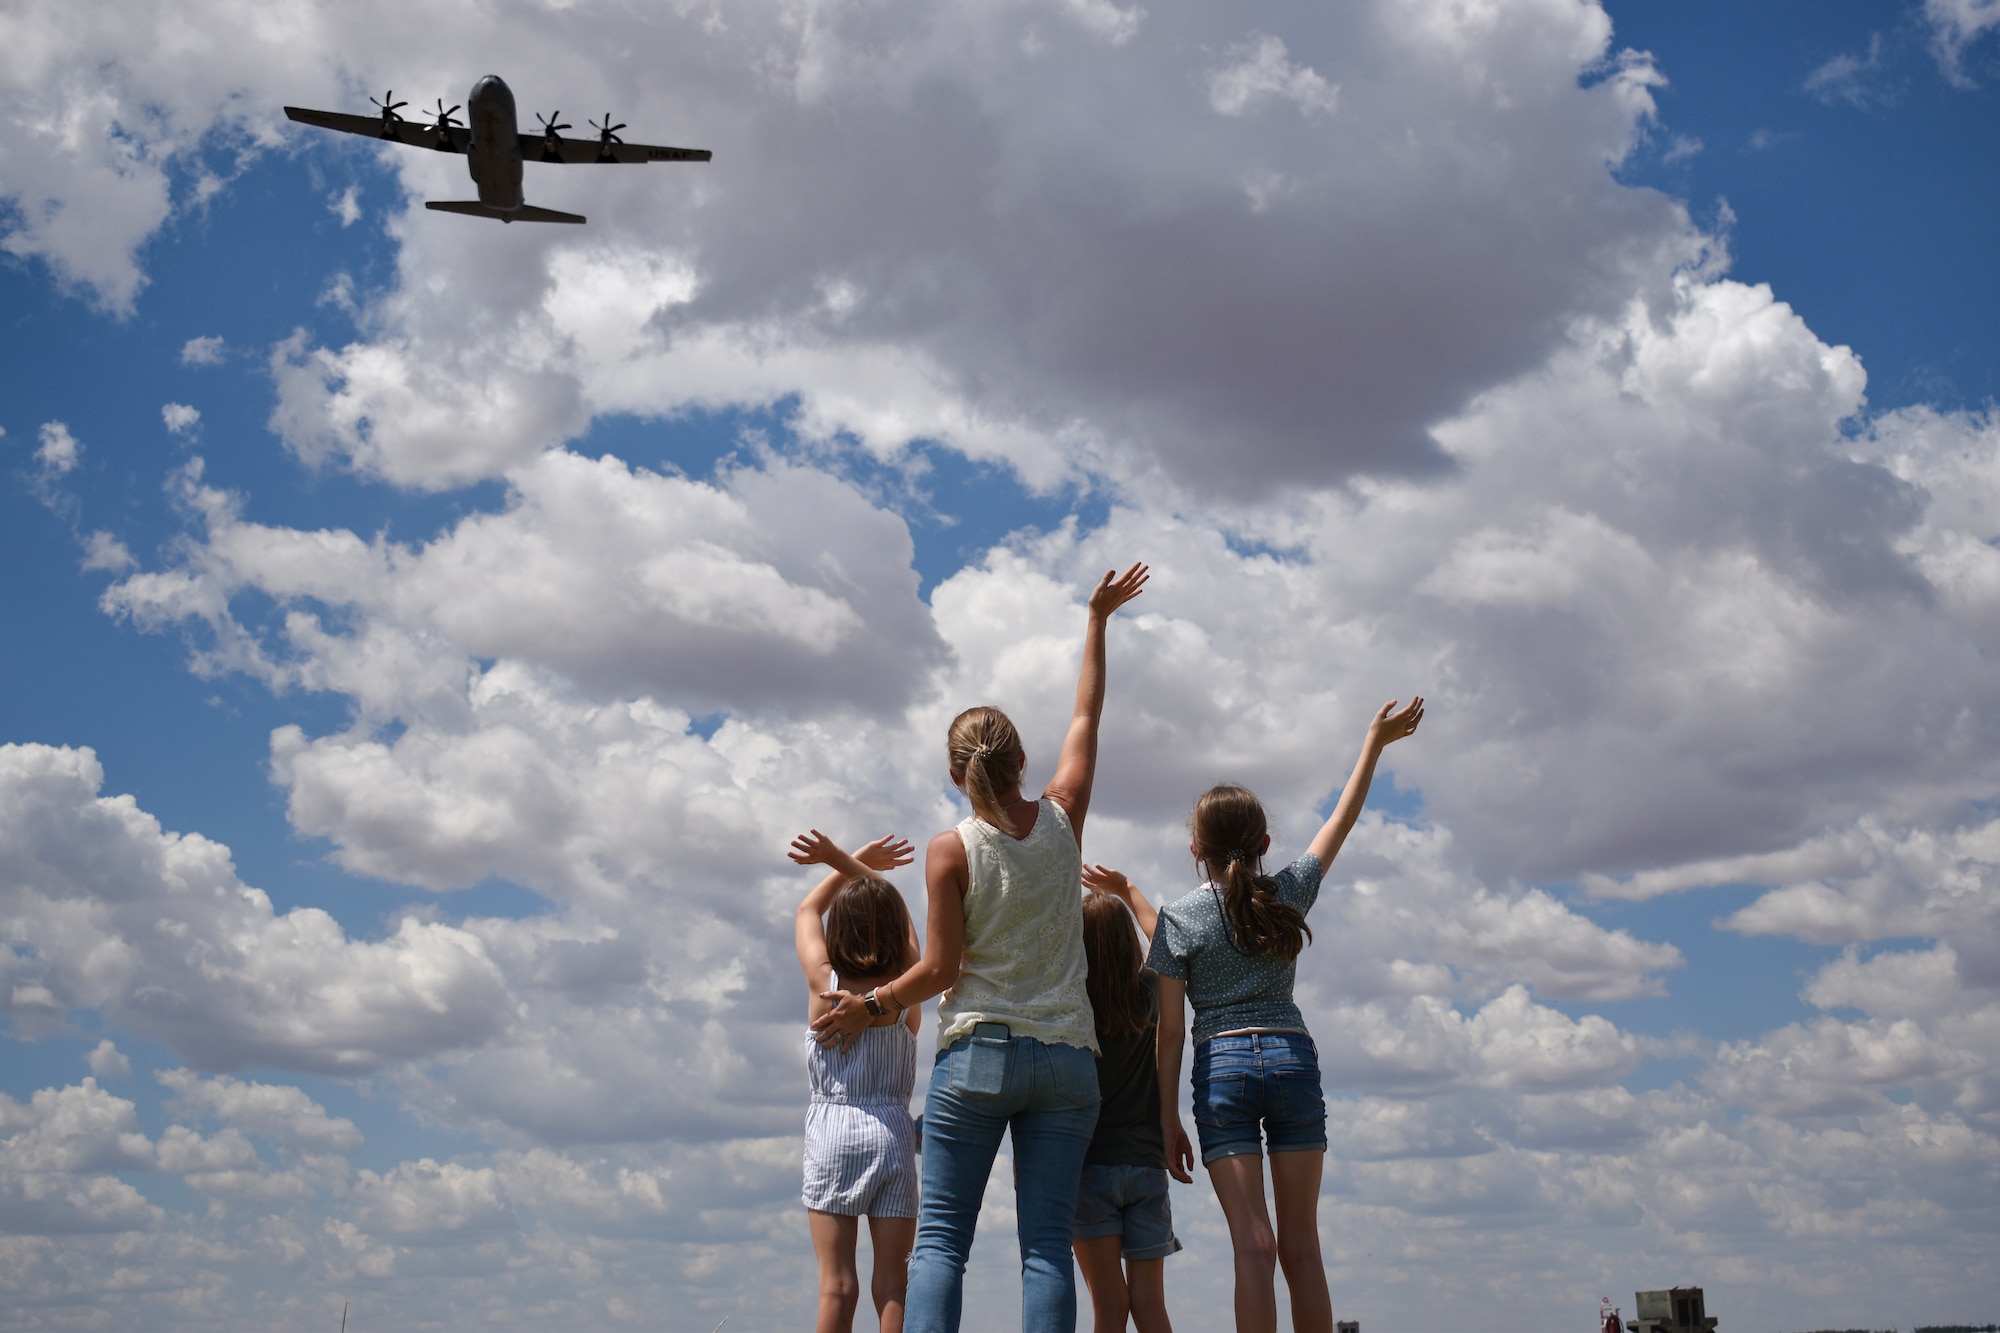 A mother and three girls wave goodbye as the C-130J model departs with their father for a deployment to CENTCOM Aug. 26, 2022. The father later texted 317th Leadership, “I swear I was waving back to my family below.” The C-130 unit’s deployment in support of U.S. Central Command taskings marks the first implementation of the Air Force Generation model in Air Mobility Command. (U.S. Air Force photo by 1st Lt. Kaitlin Cashin)